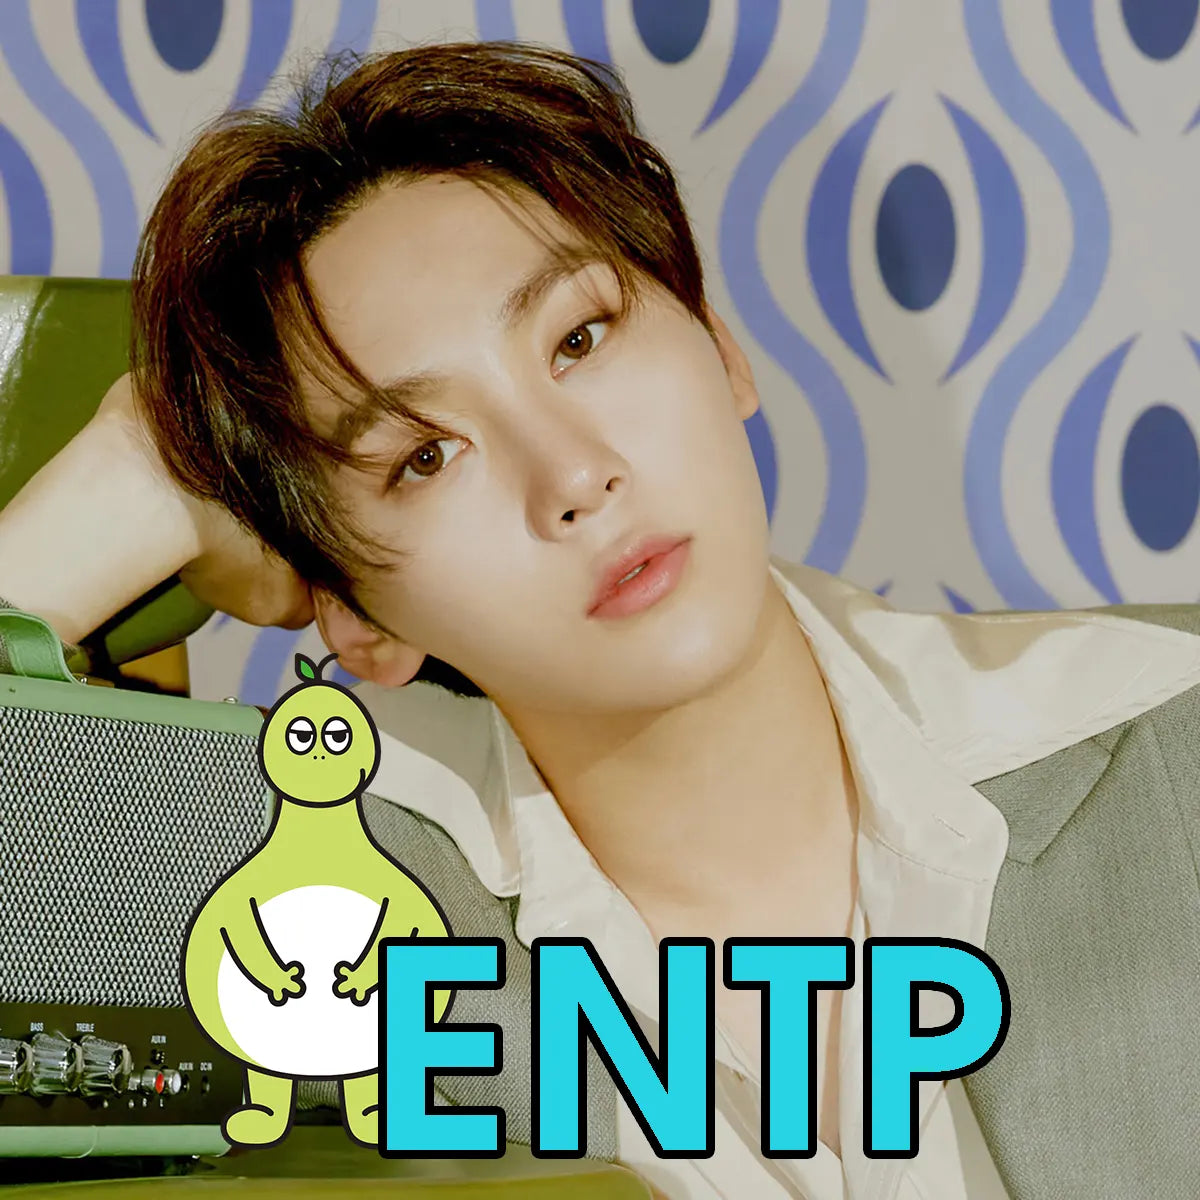 Here Are The MBTI Types For The Leaders Of 35 K-Pop Groups - Koreaboo